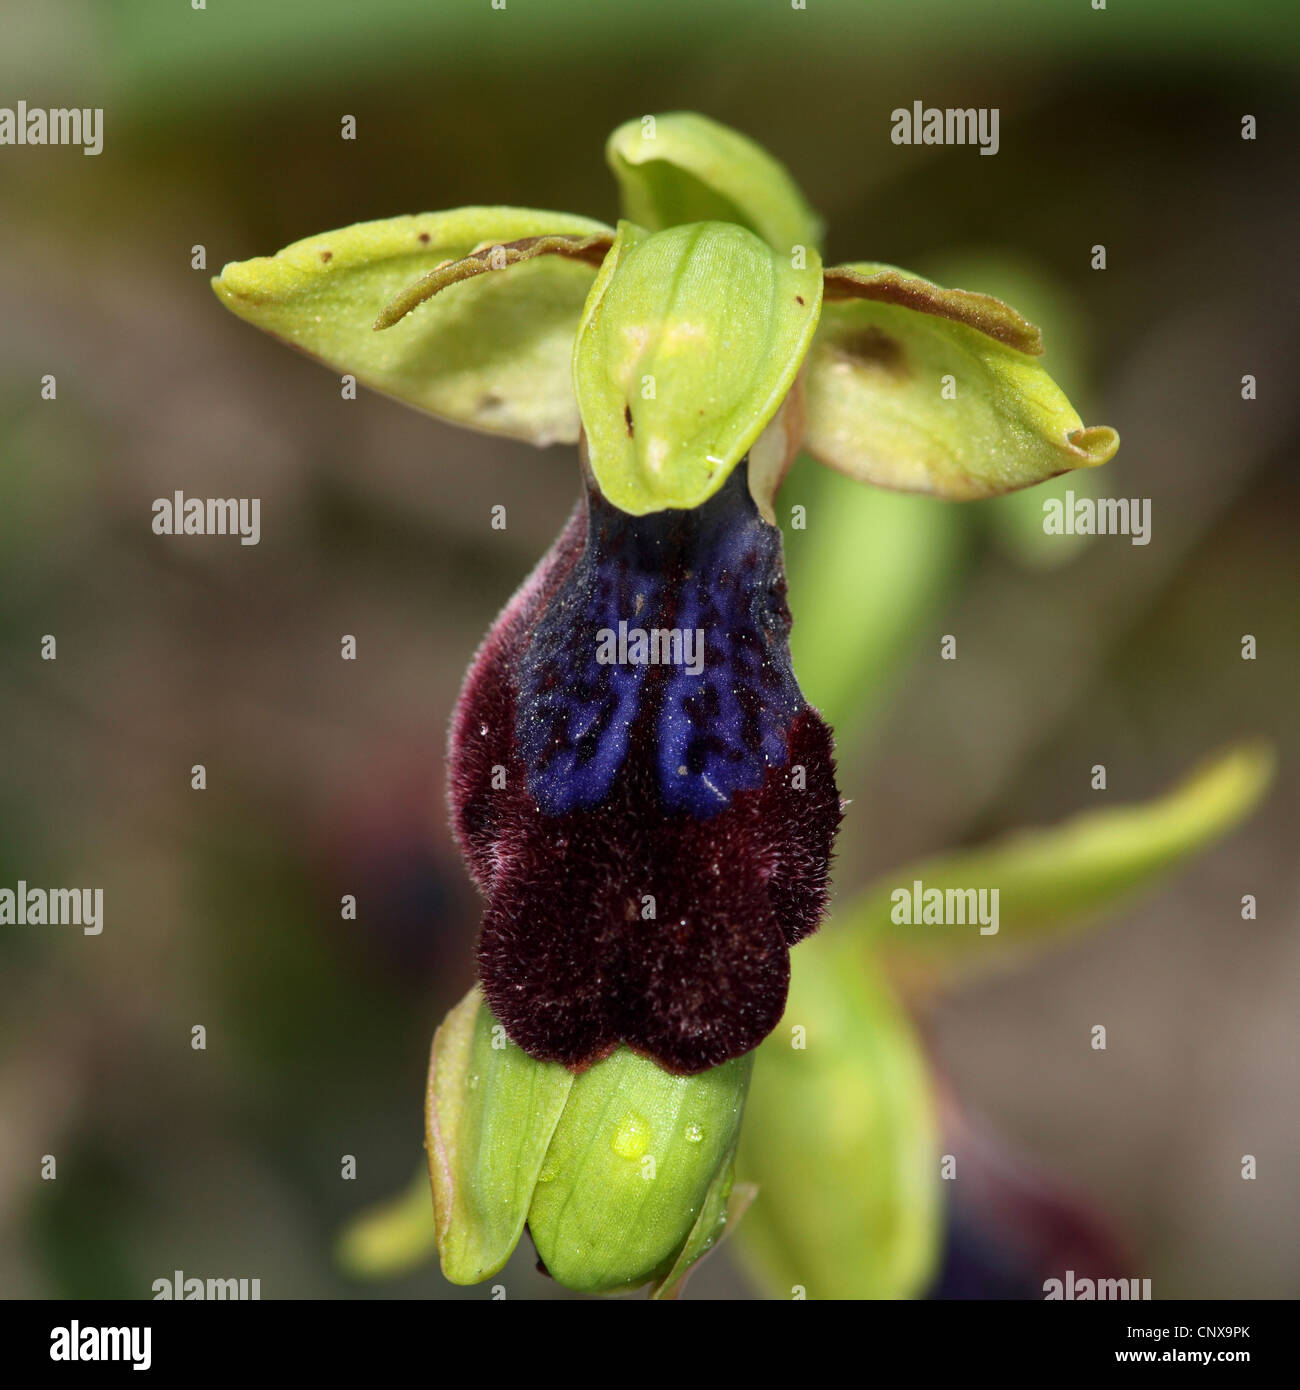 Ape bruna orchid, cupo bee orchid, brunastro ophrys (Ophrys fusca), fiore, Grecia LESBO Foto Stock